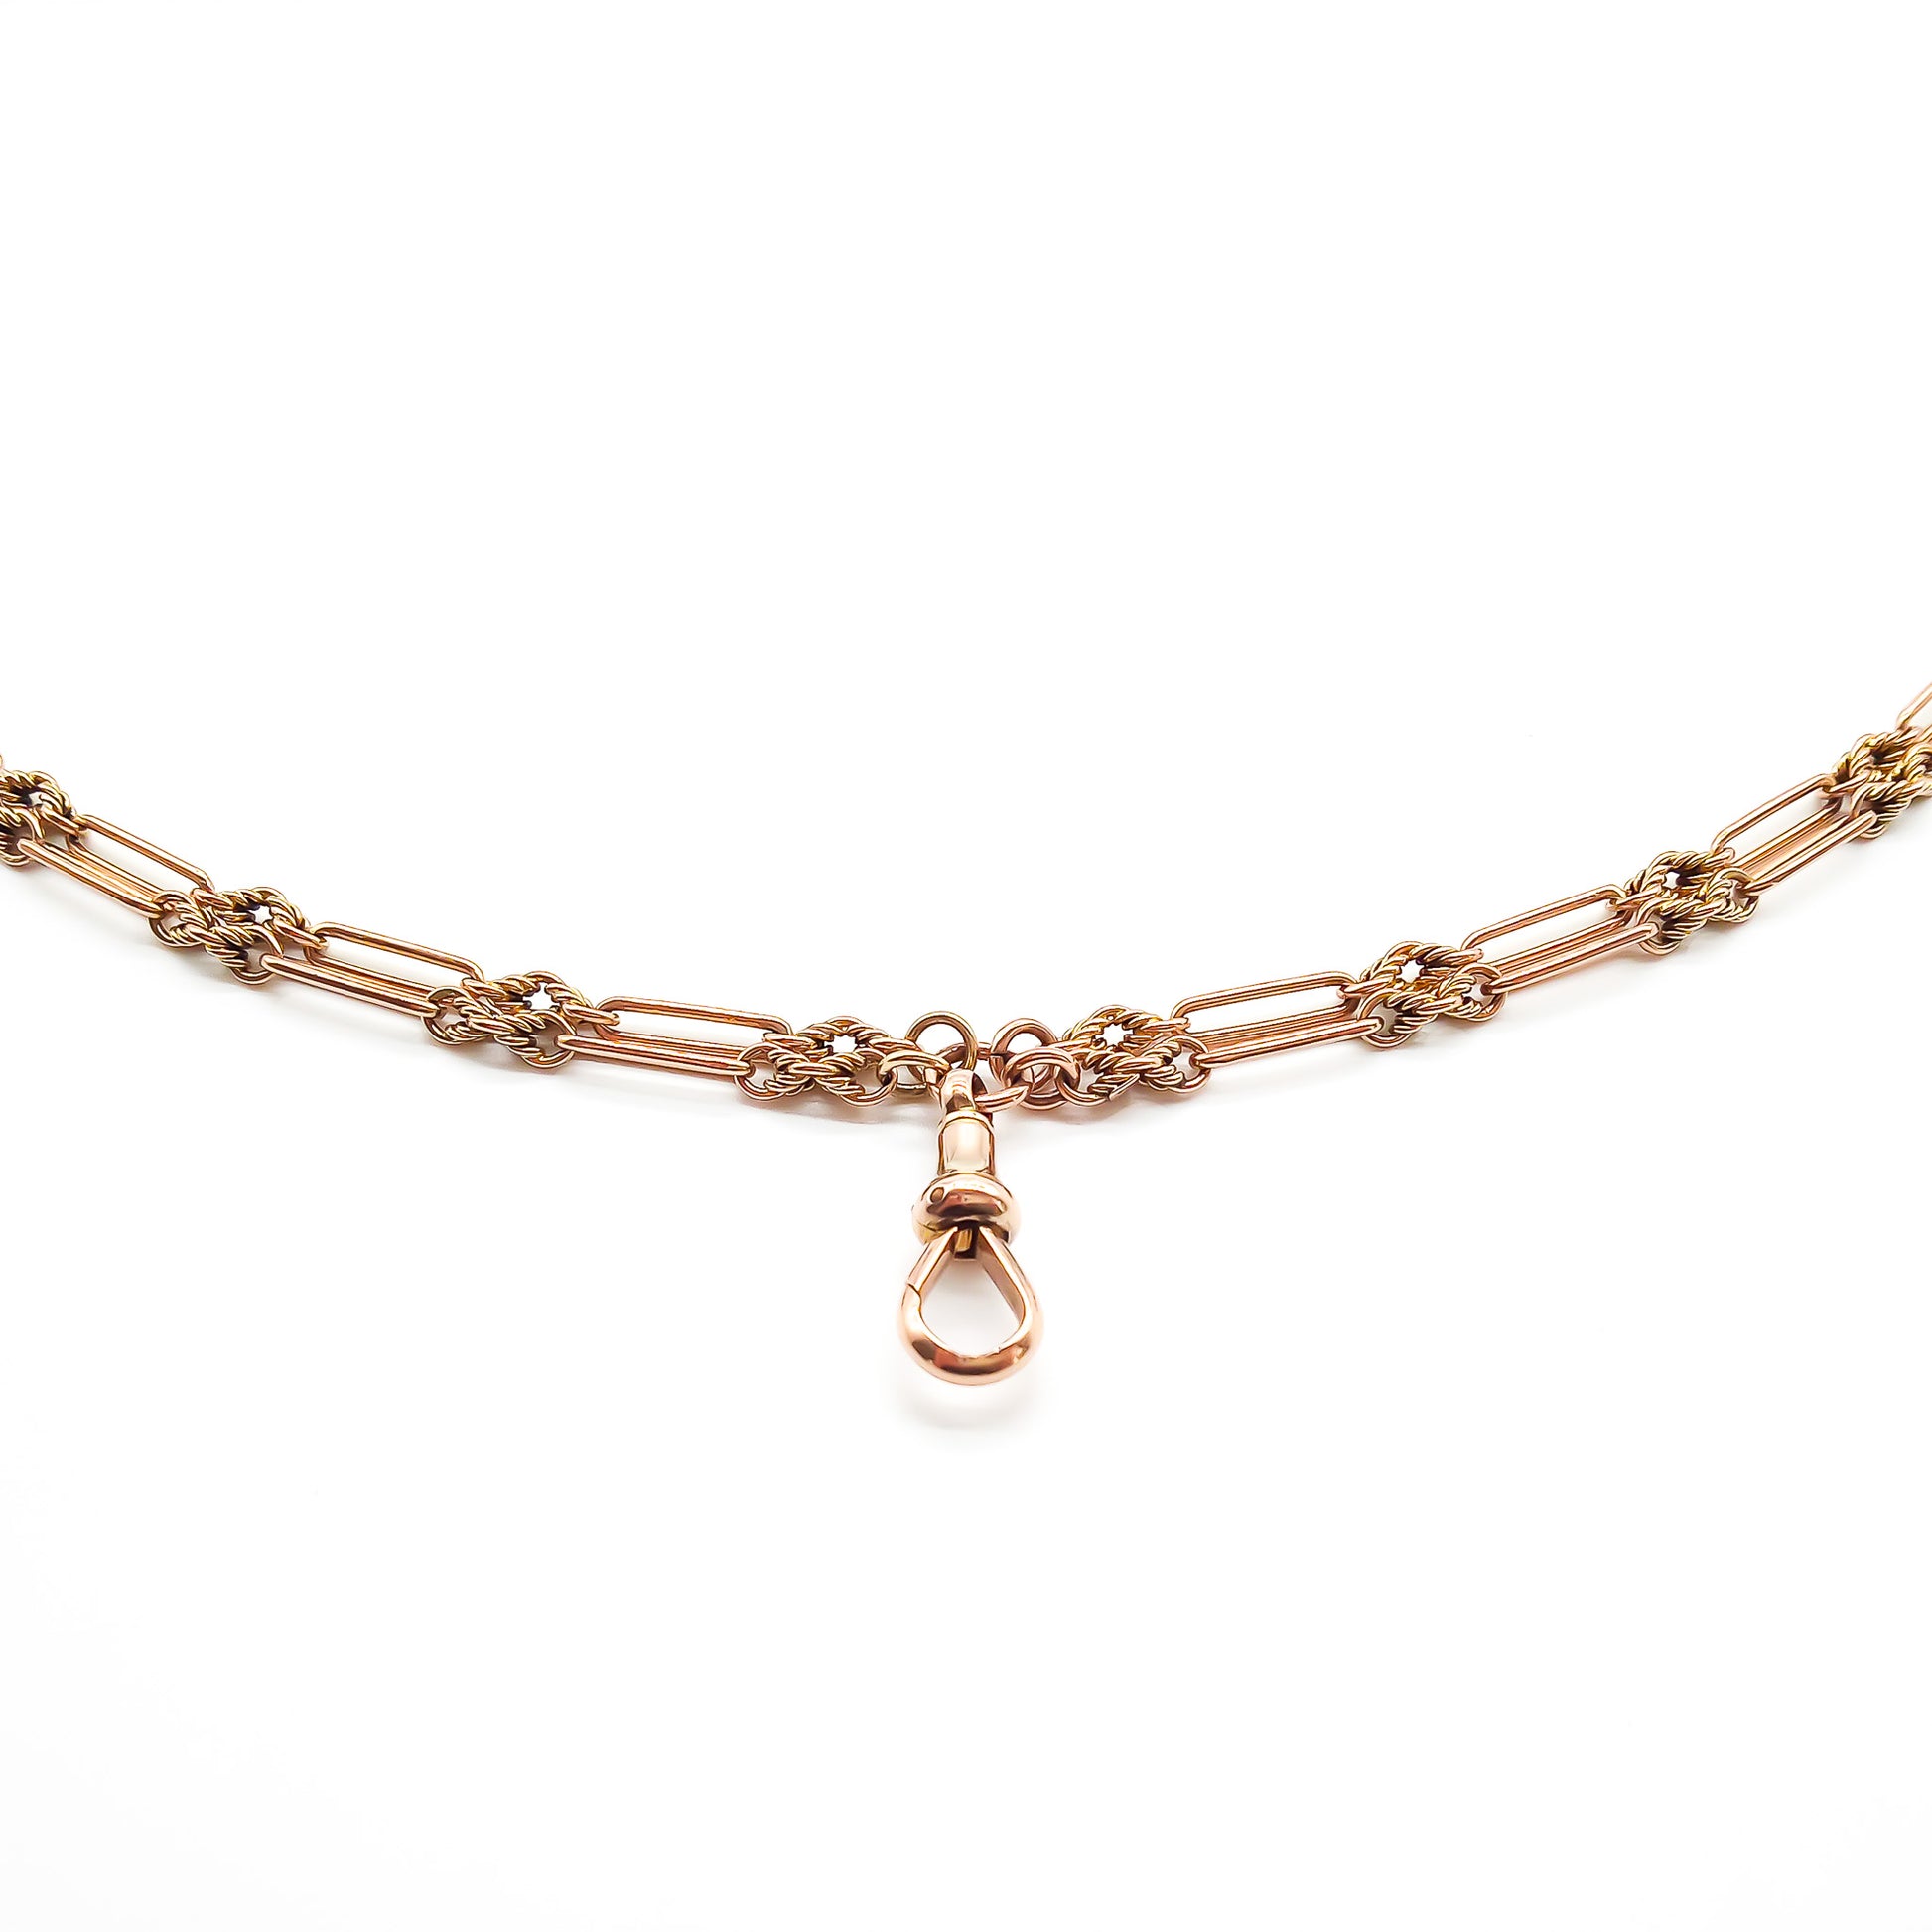 Lovely Victorian 9ct rose gold ornate paperclip link long guard double chain with a dog-clip.